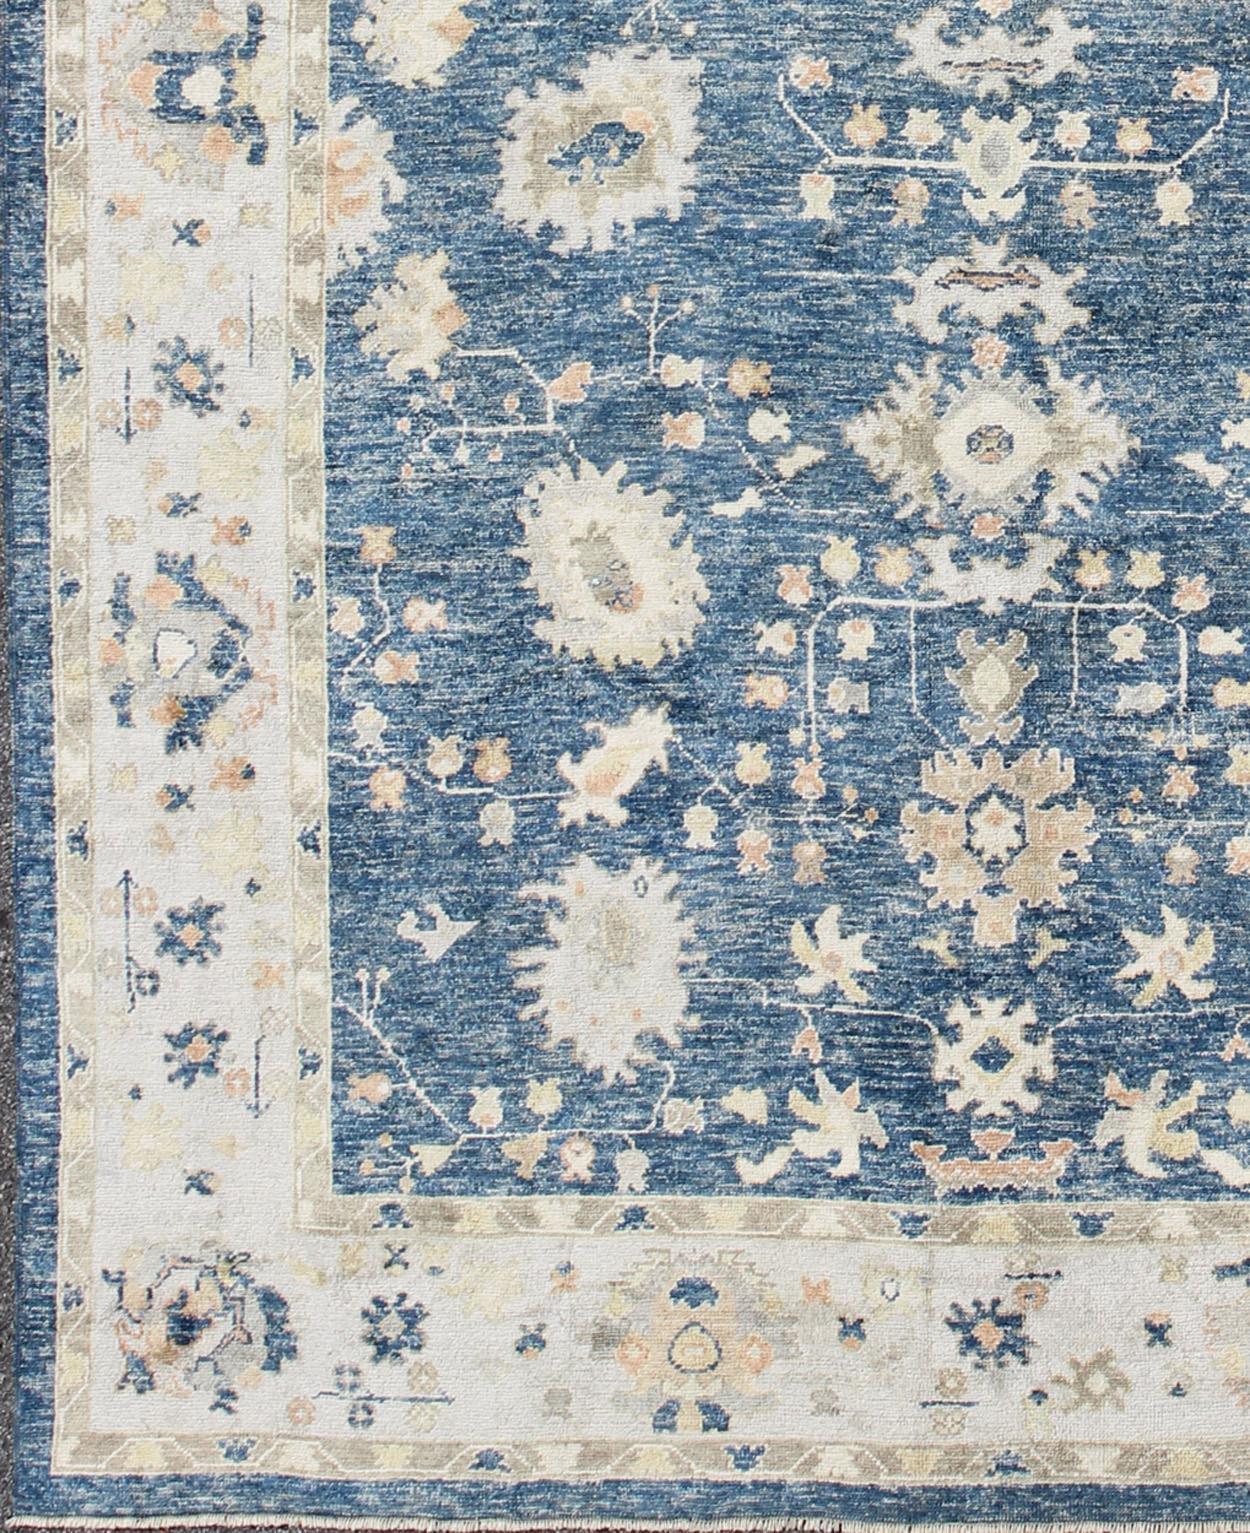 Turkish Oushak rug in blue background with neutral color palette and all-over flower design. Keivan Woven Arts / rug EN-165651, country of origin / type: Turkey / Oushak
Measures: 10'5 x 13'4.
This traditional Oushak rug from Turkey features a